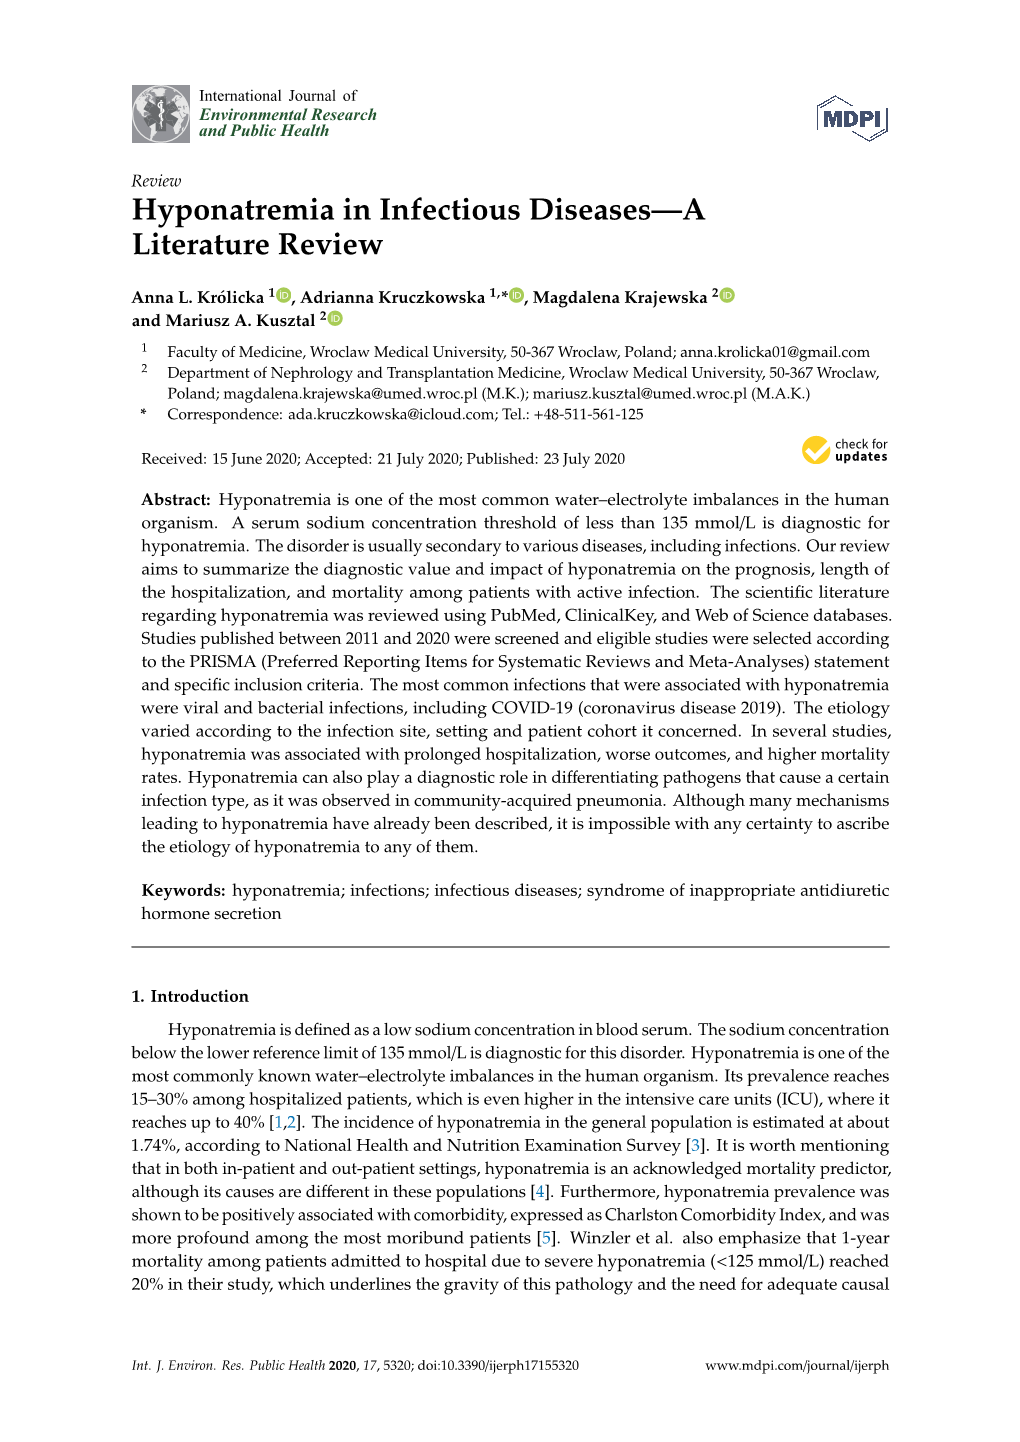 Hyponatremia in Infectious Diseases—A Literature Review